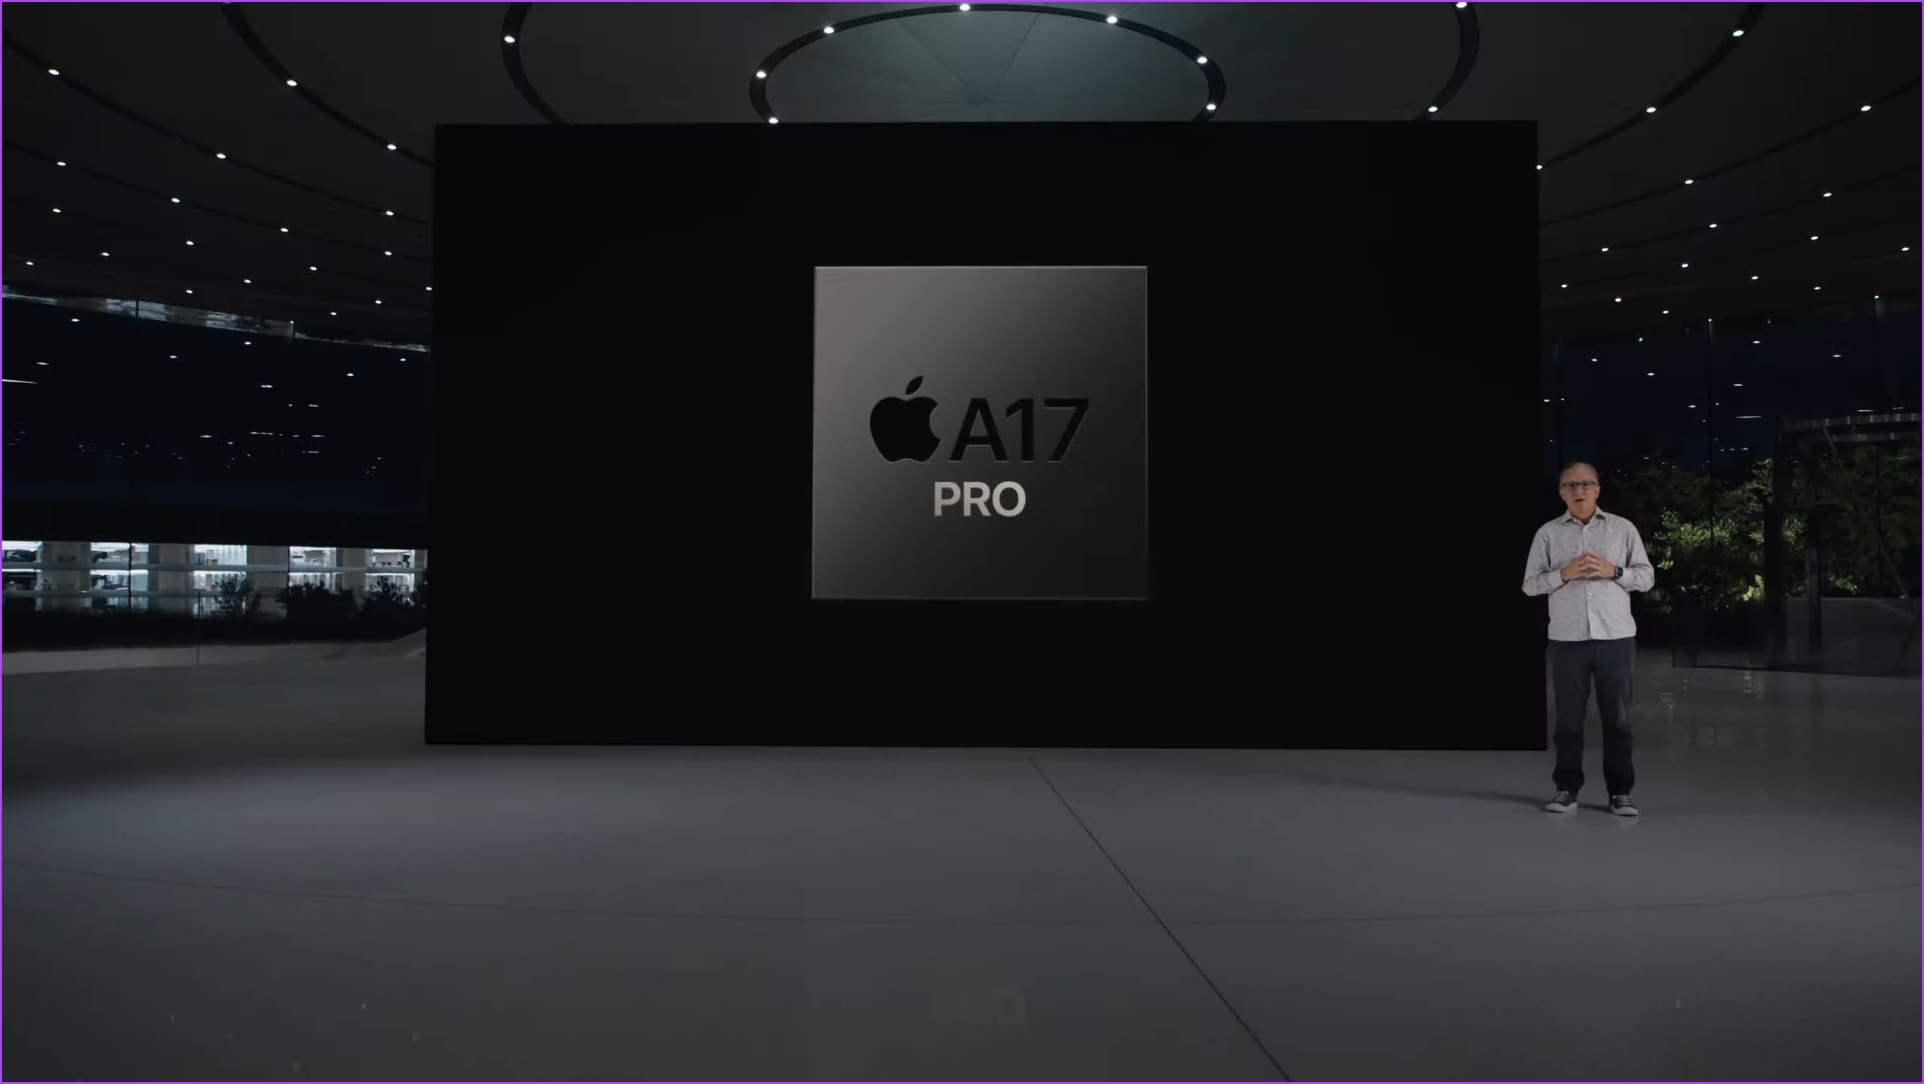 Apple Launches the A17 Pro